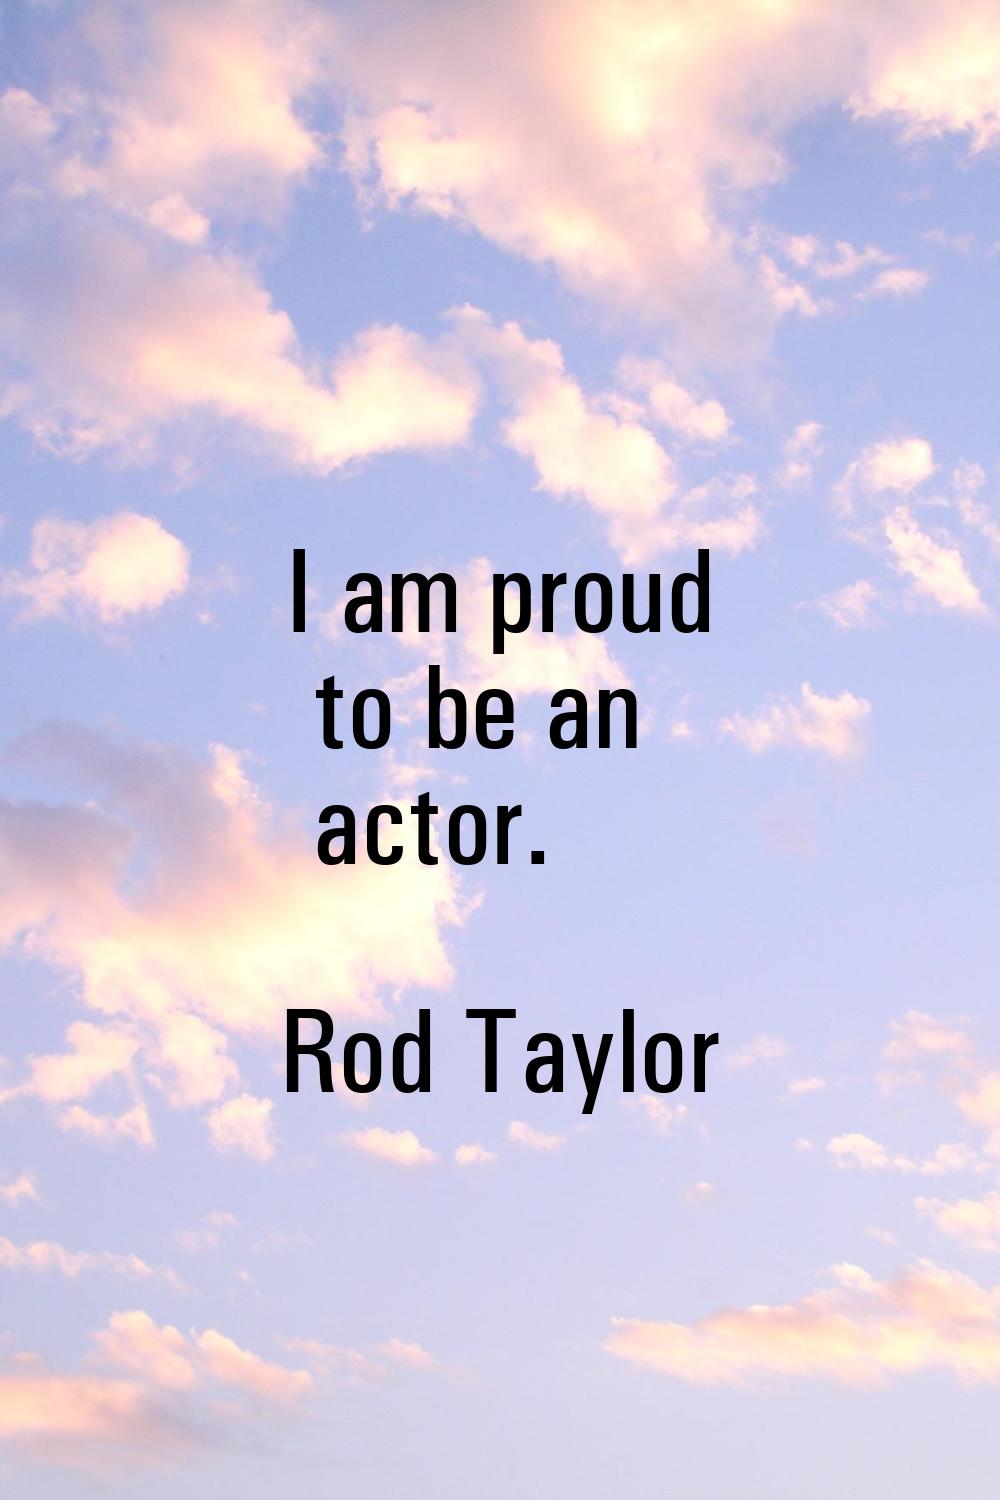 I am proud to be an actor.